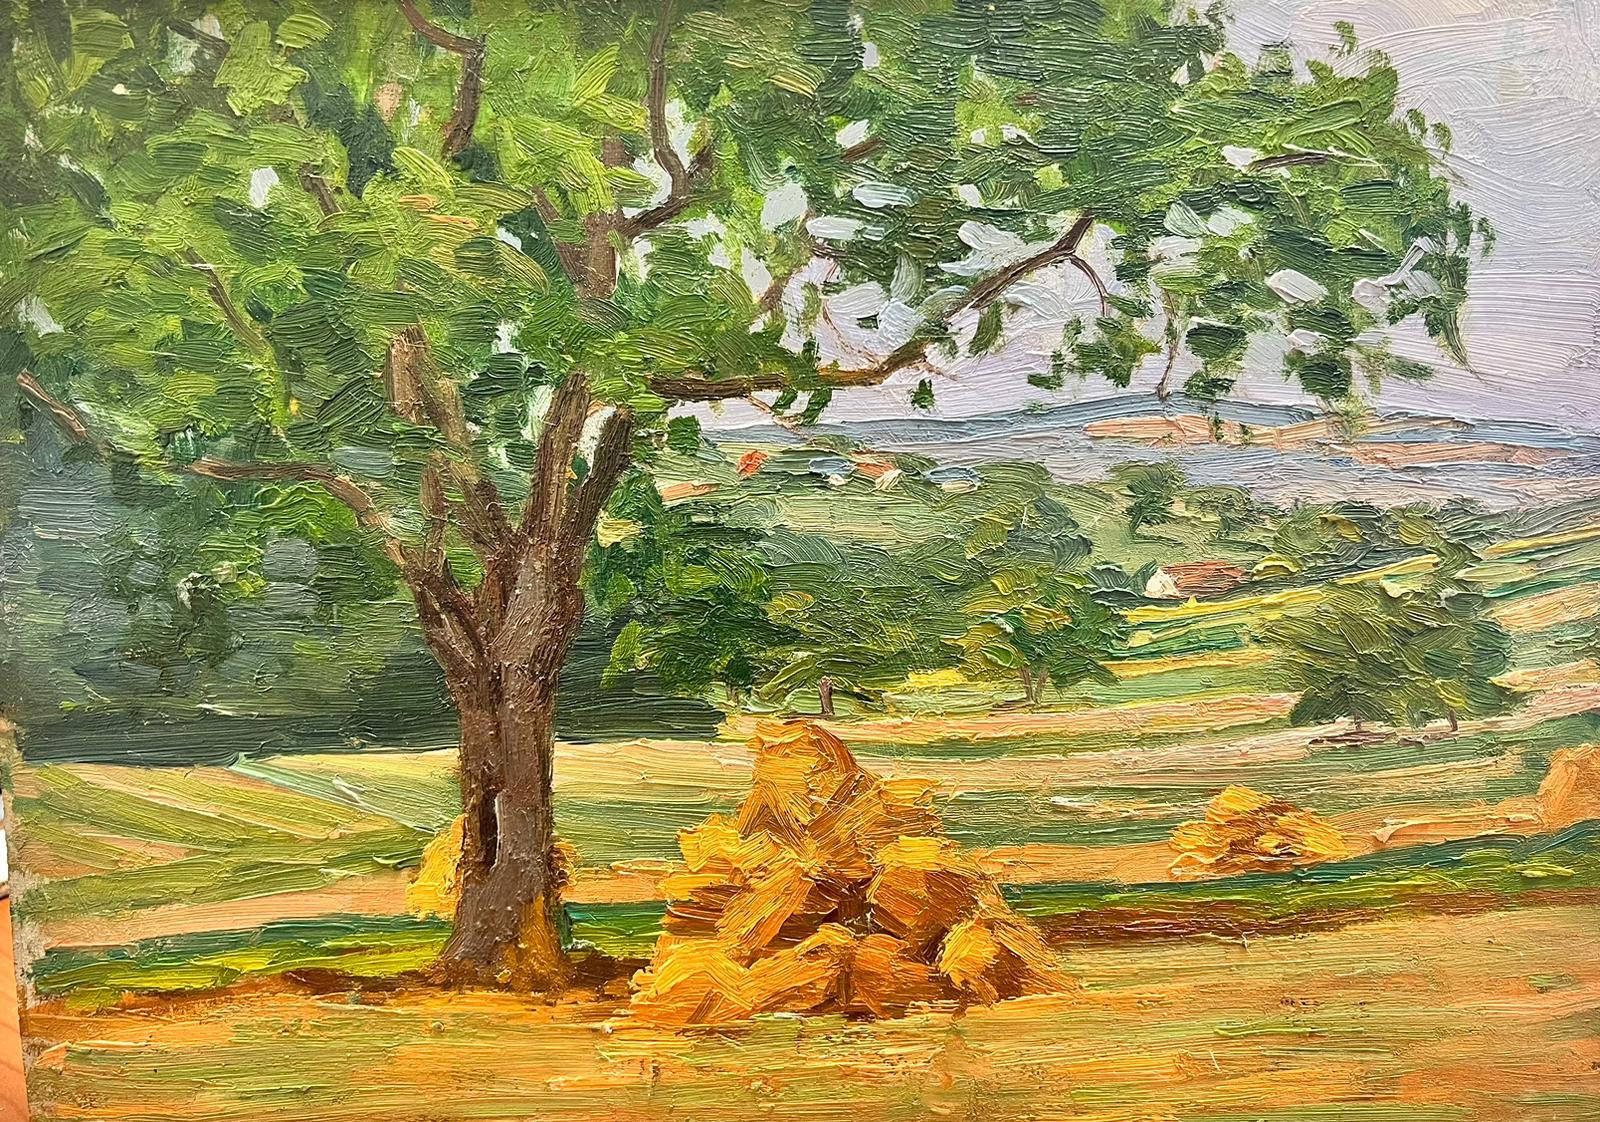 Suzanne Crochet Figurative Painting - 1930's French Post Impressionist Oil Painting Haystack under Tree Landscape 